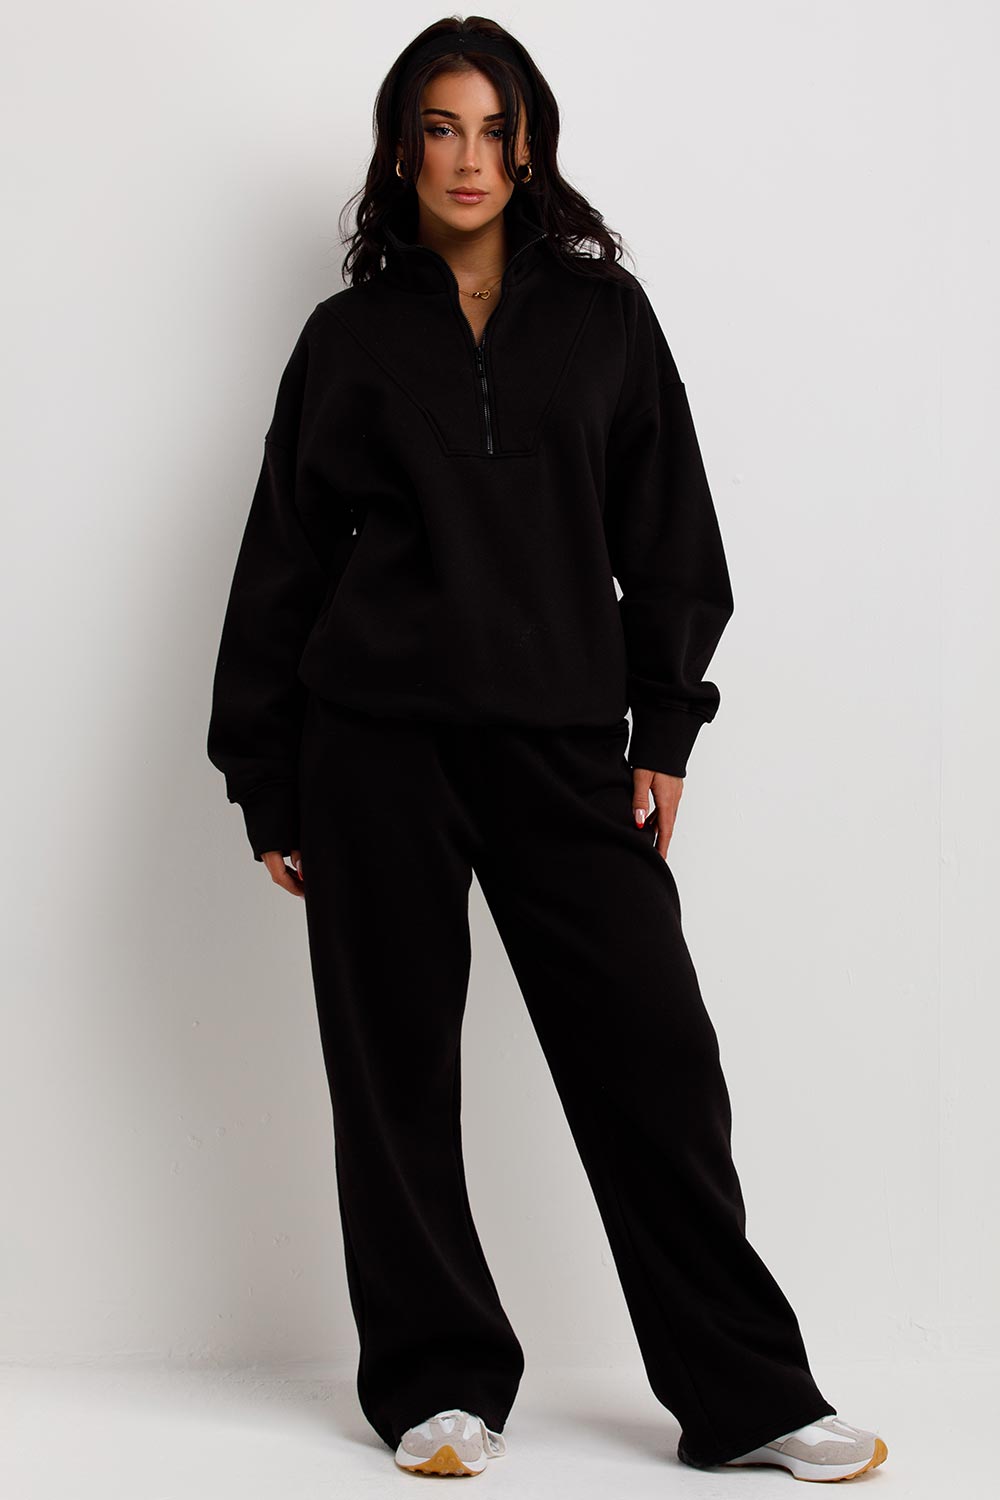 womens loungewear co ord black wide leg joggers and half zip sweatshirt airport outfit